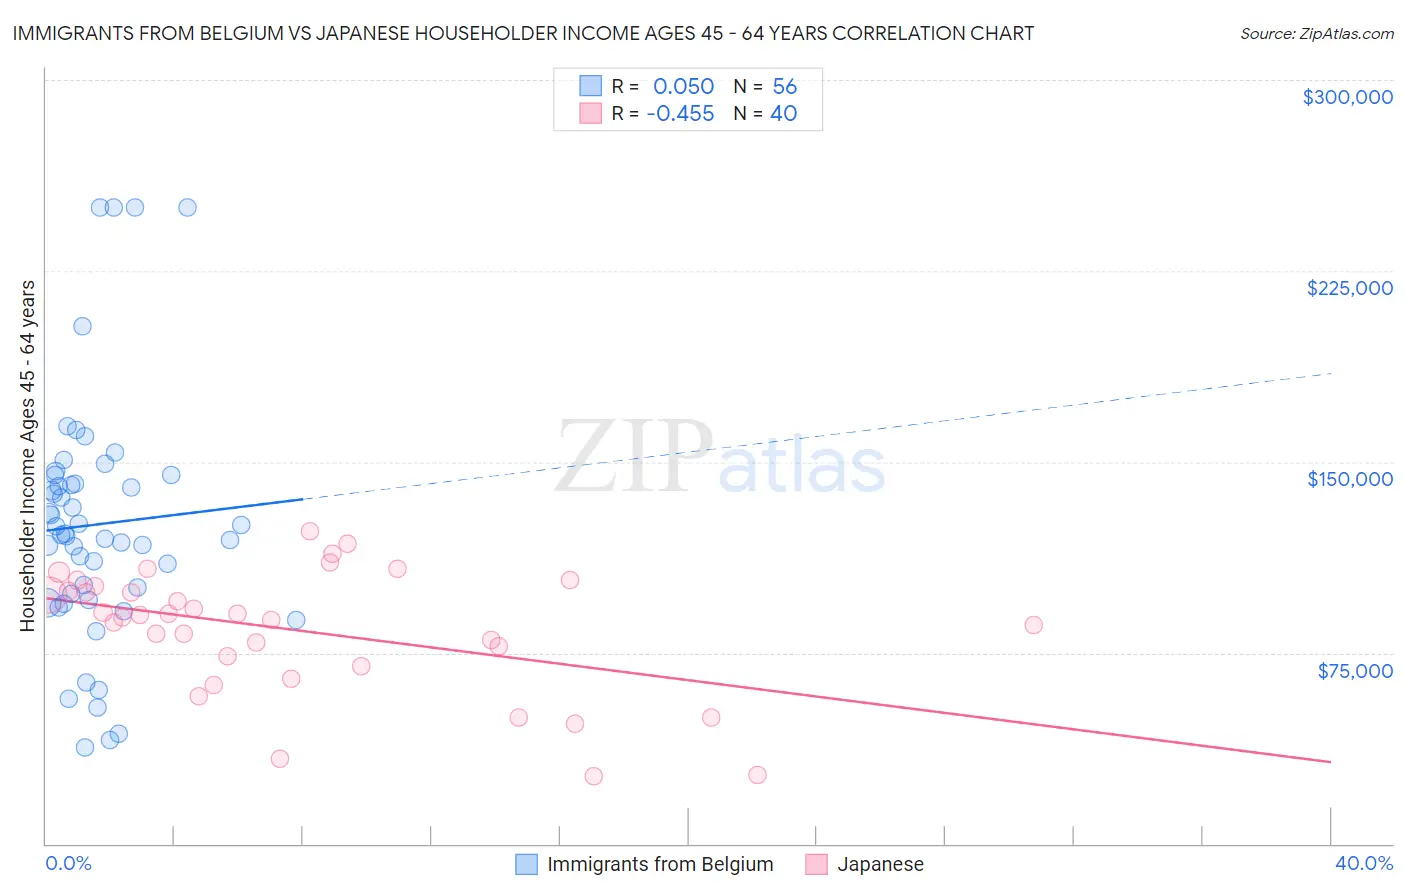 Immigrants from Belgium vs Japanese Householder Income Ages 45 - 64 years